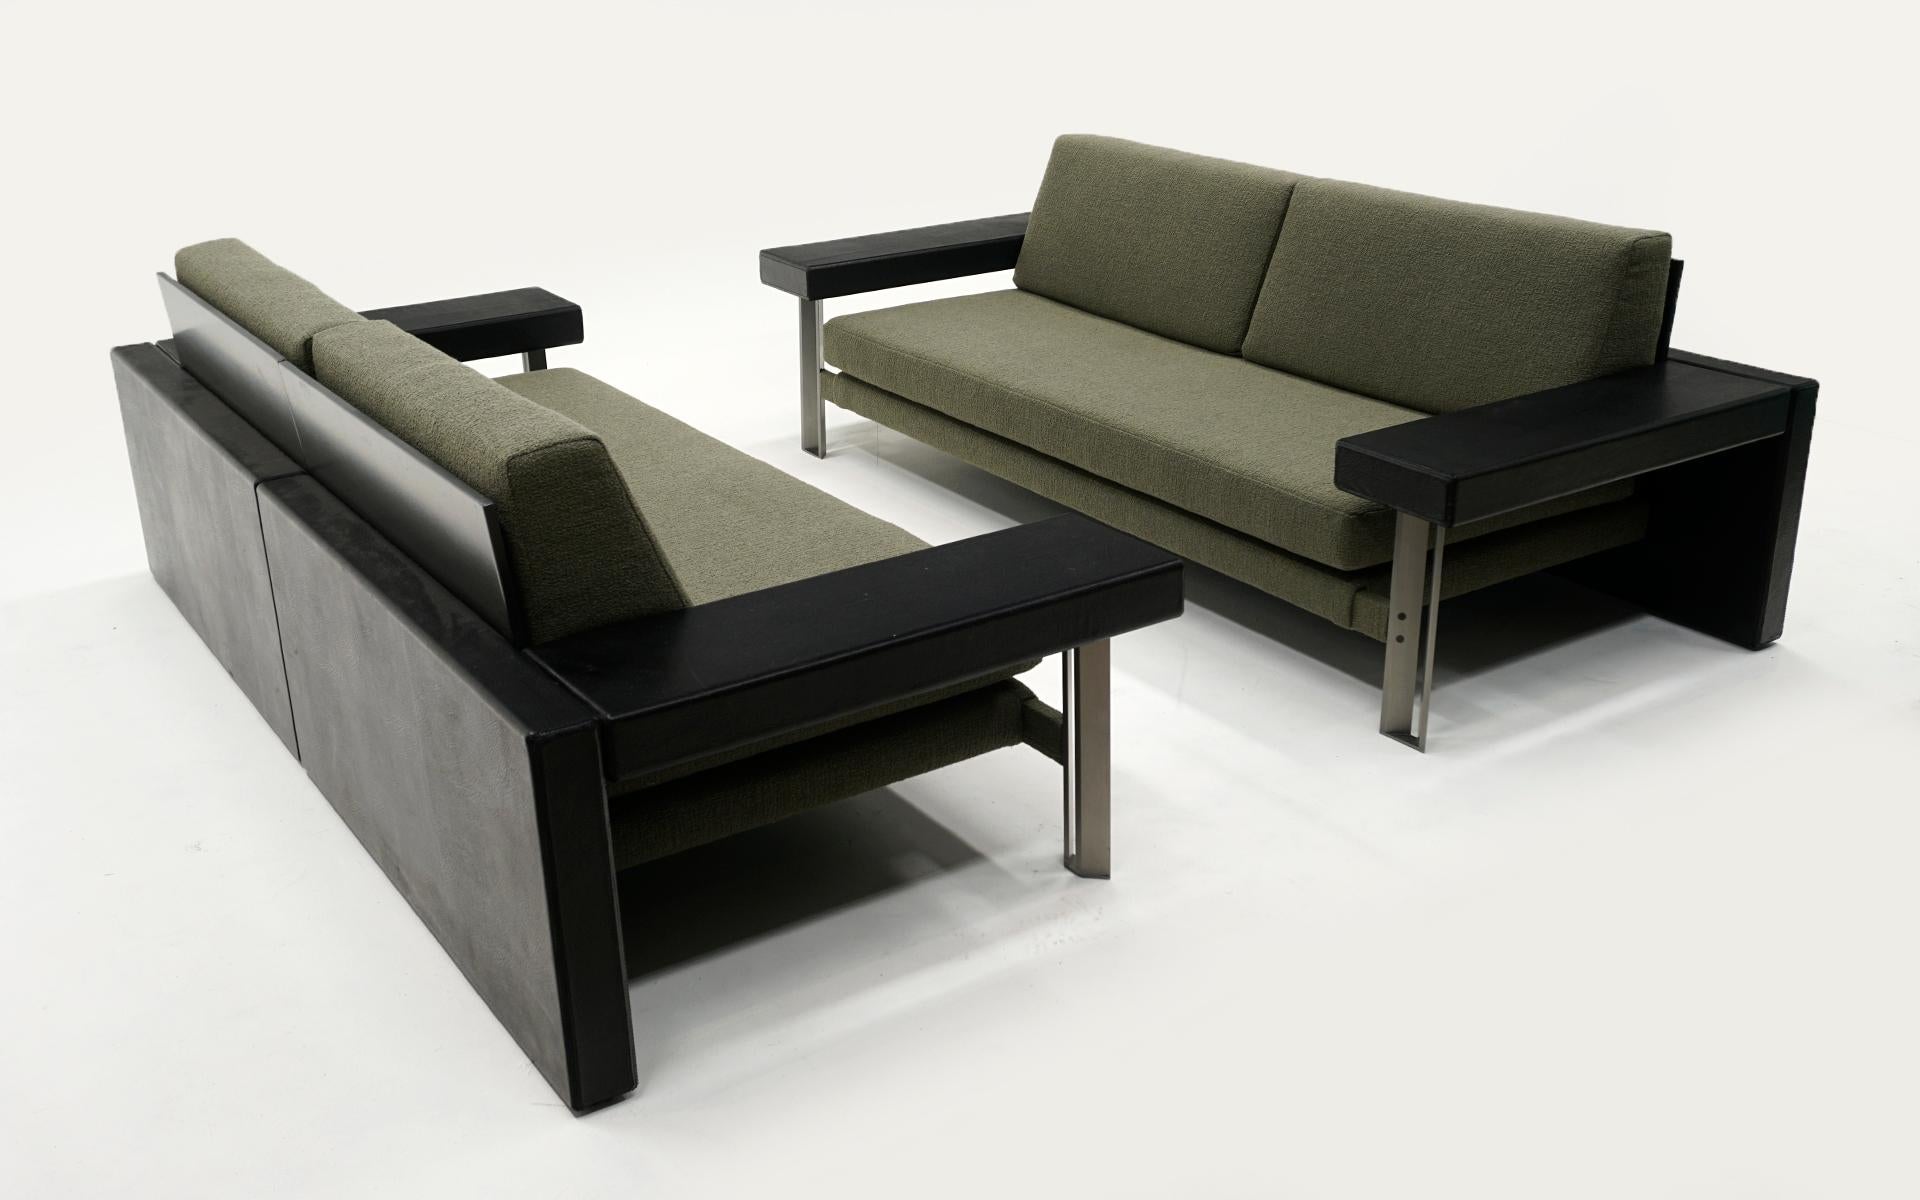 Lacquered Pair of Sofas by Giovanni Offredi for Saporiti, Italy, 1970s.  Ready to Use. For Sale